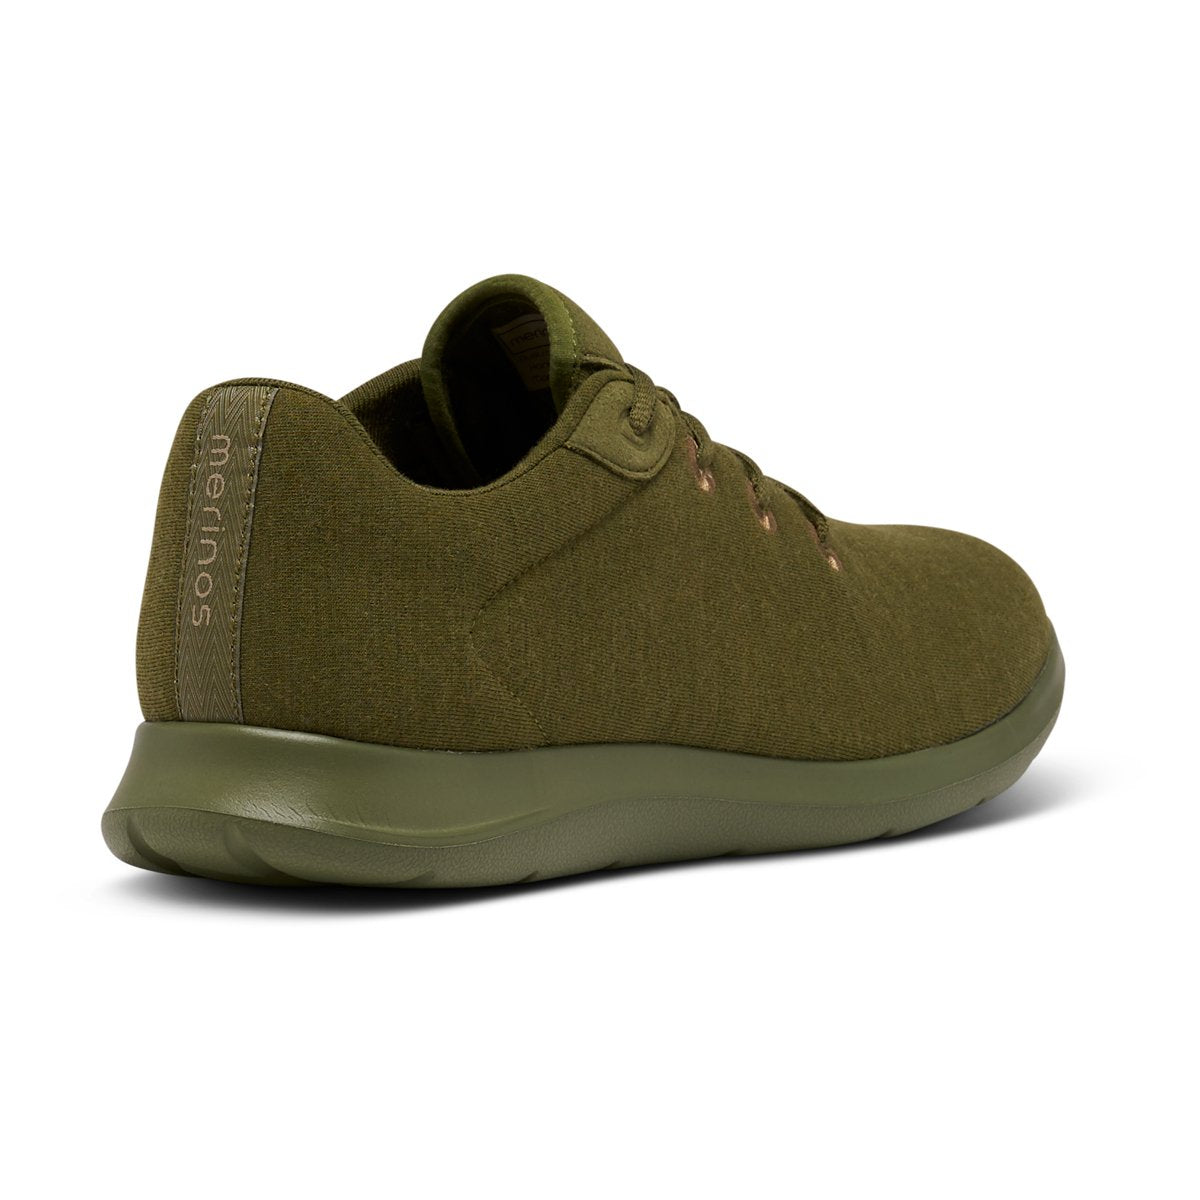 Men's Lace-Ups Olive Green